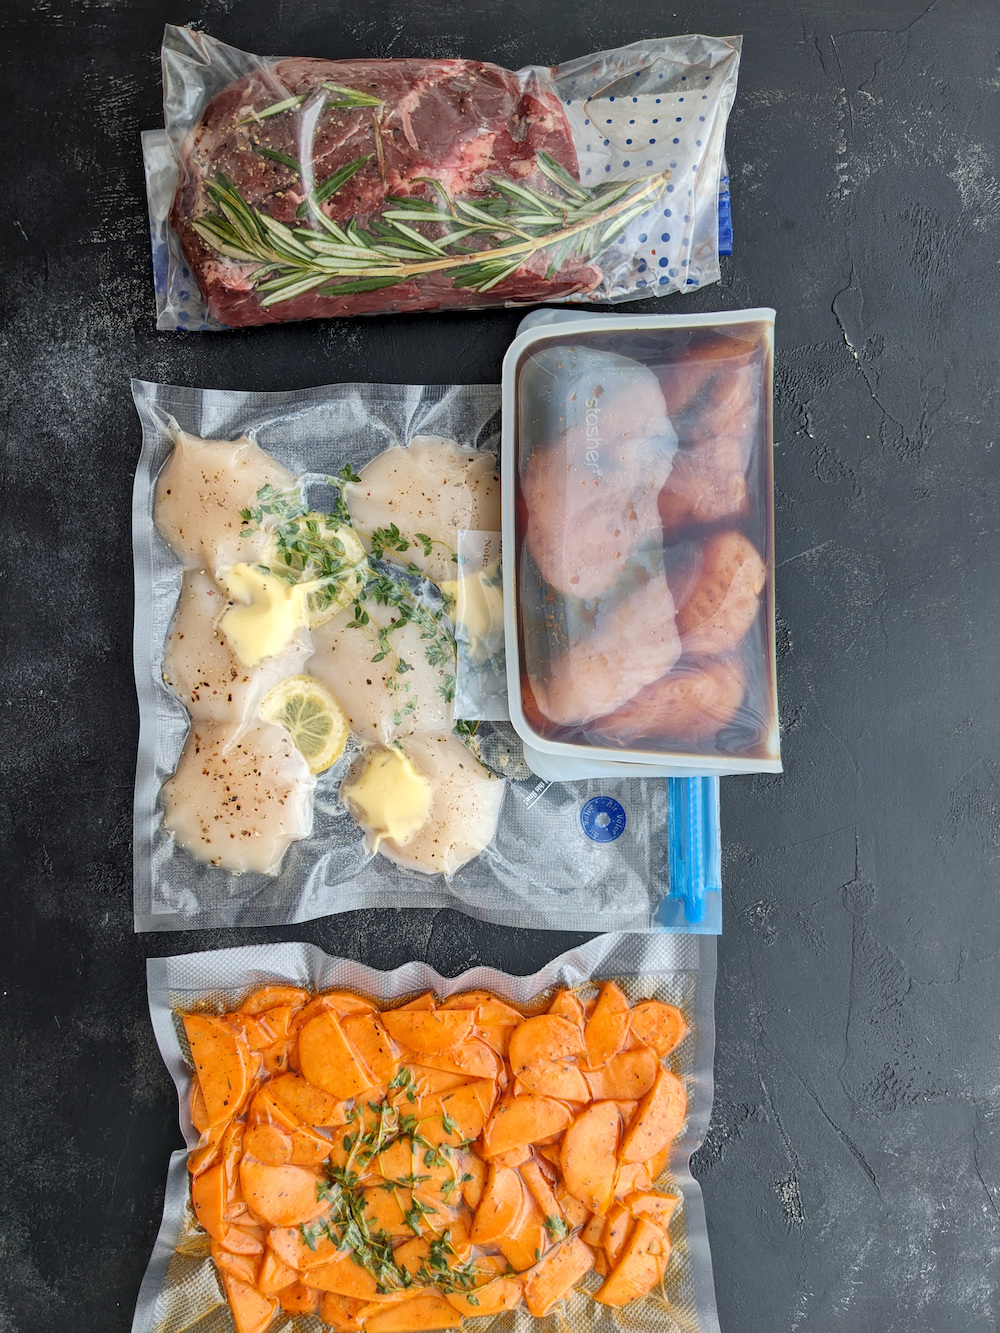 Learn the different types of sous vide bags and their pros and cons and how to choose the right one for your sous vide cooking needs.